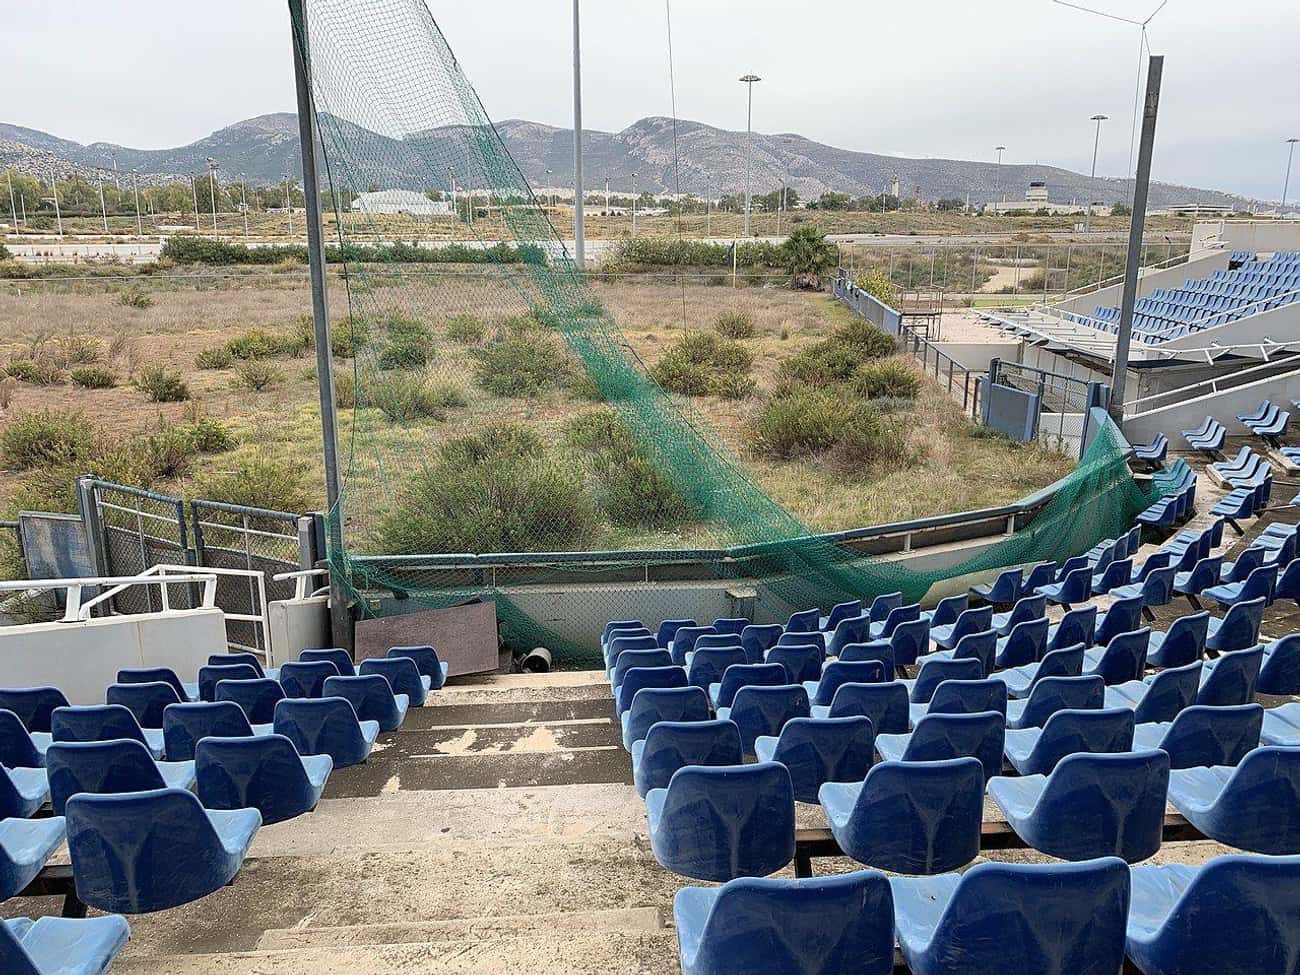 The Hellinikon Softball Stadium from the 2004 Summer Olympics in Athens